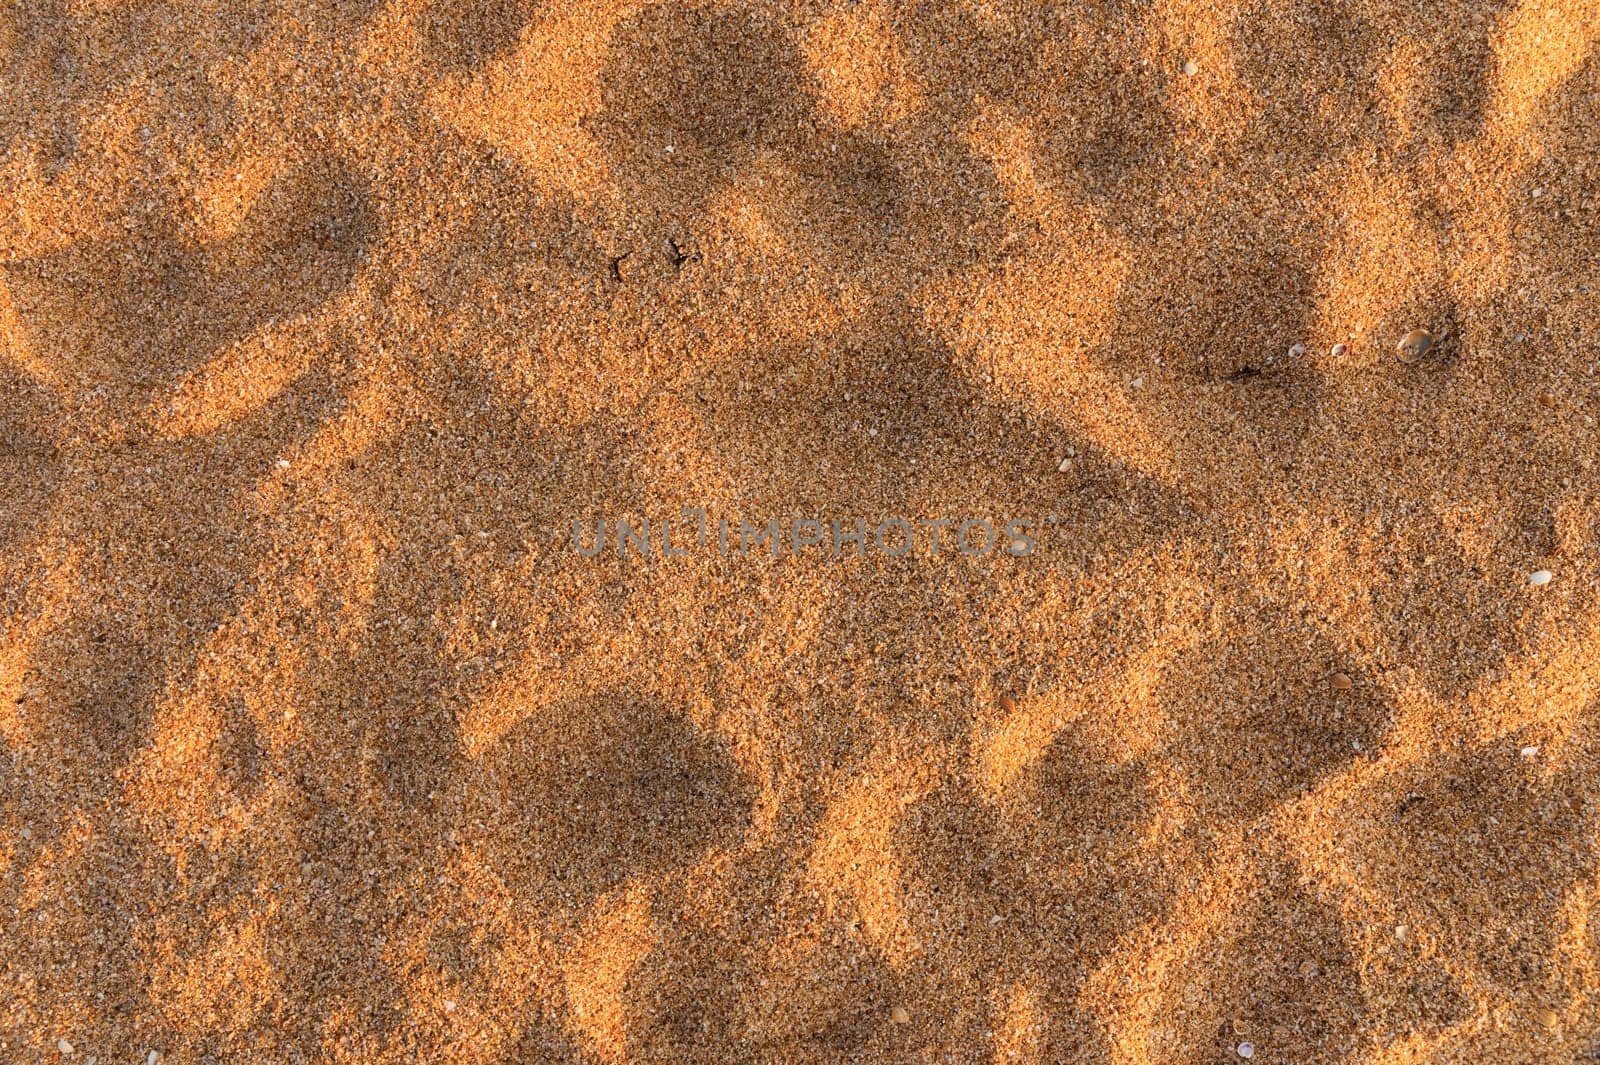 Yellow lumpy sand background on the beach in side sunset light. Rich Image by yanik88